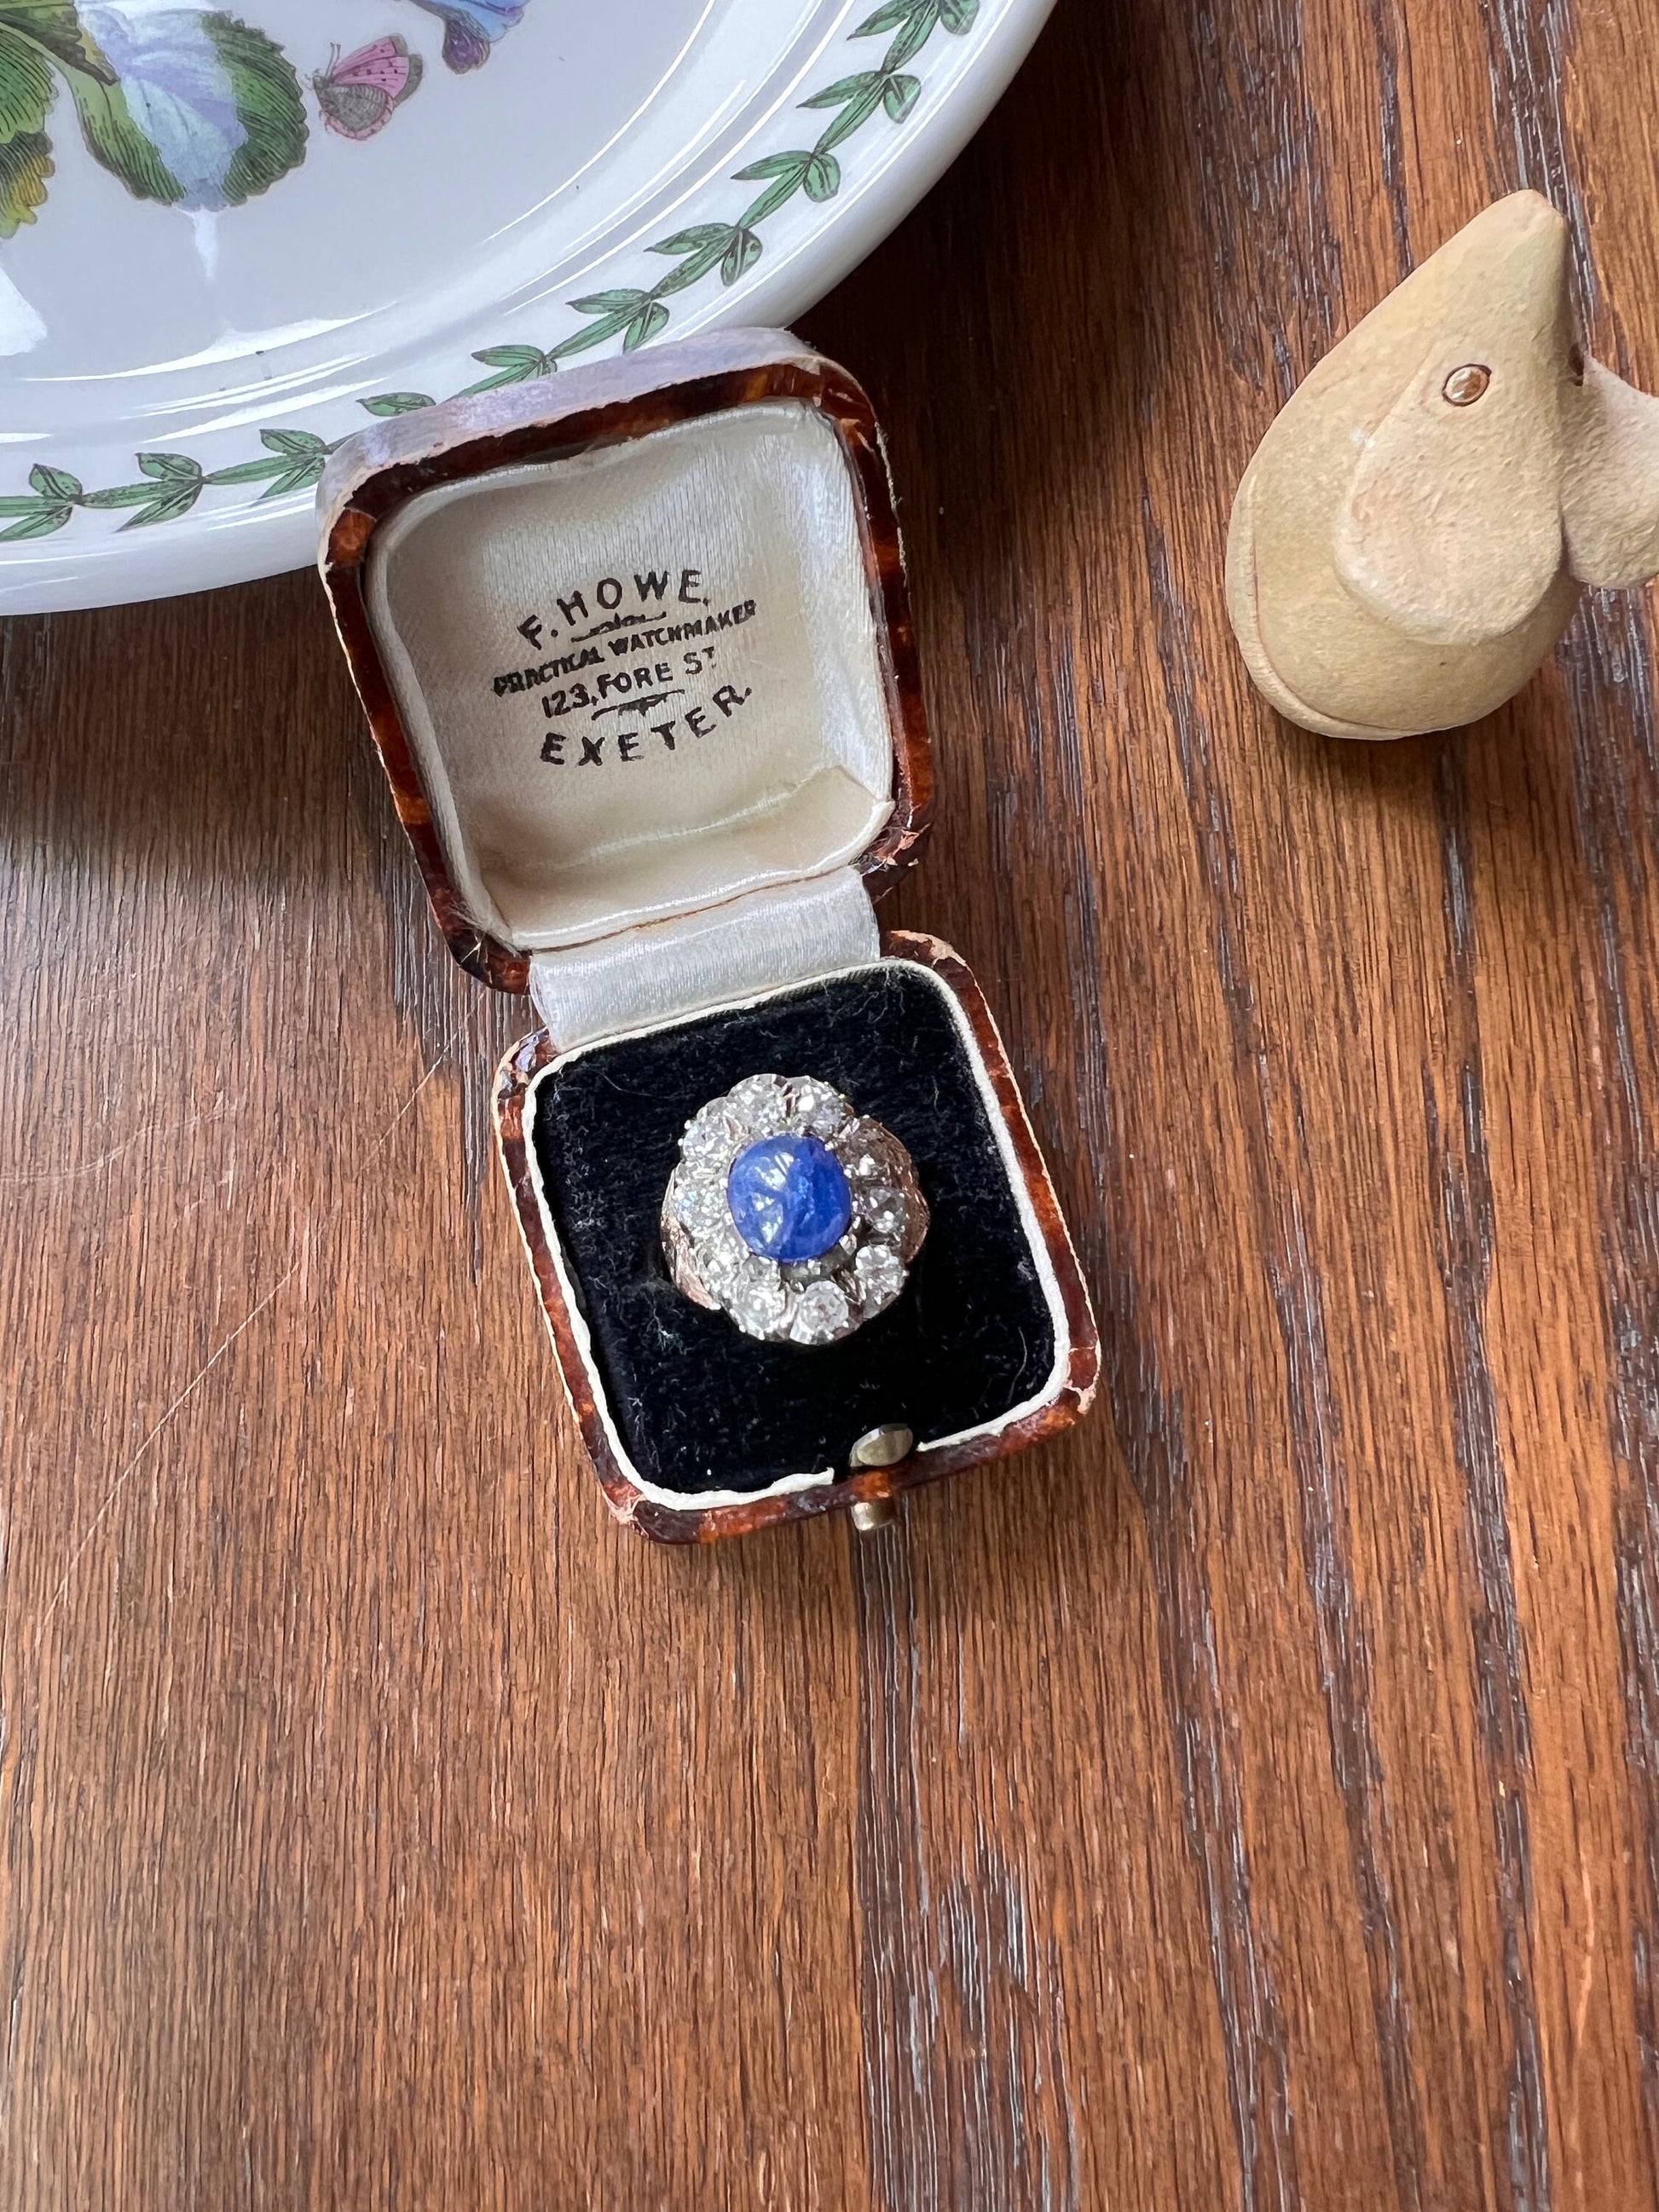 GEORGIAN Antique HEAVY Natural Cabochon Sapphire 1 Carat Old Mine Cut Diamond Halo Ring & Box French? Tall Domed Blue Silver Collet OMC Gift